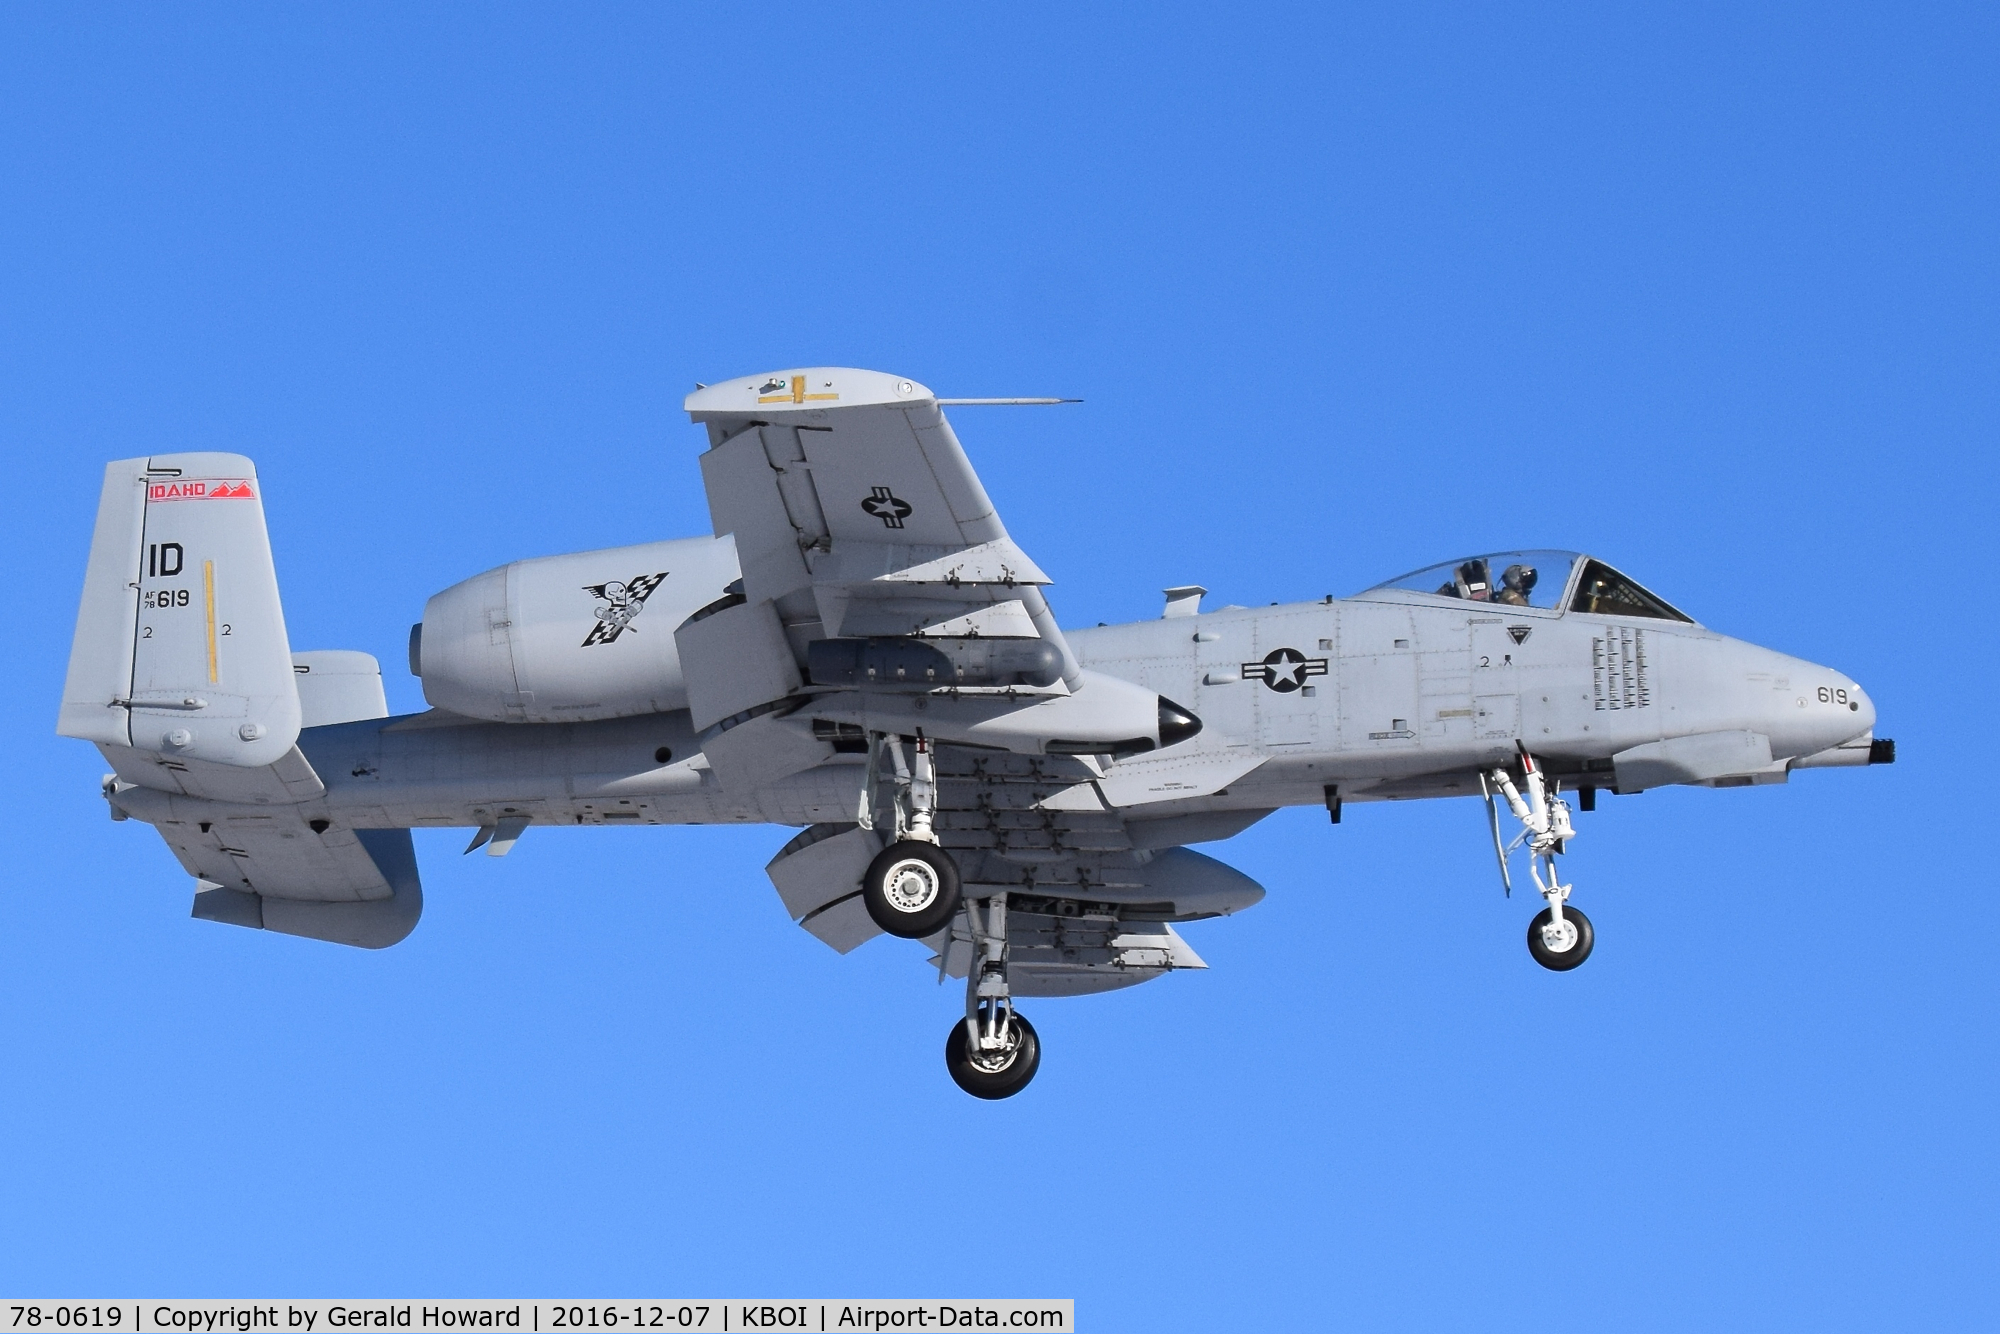 78-0619, 1978 Fairchild Republic A-10C Thunderbolt II C/N A10-0239, On final for RWY 10R. Still has the mission markings on the nose from the 190th Fighter Sq.'s six month tour in the Middle East.